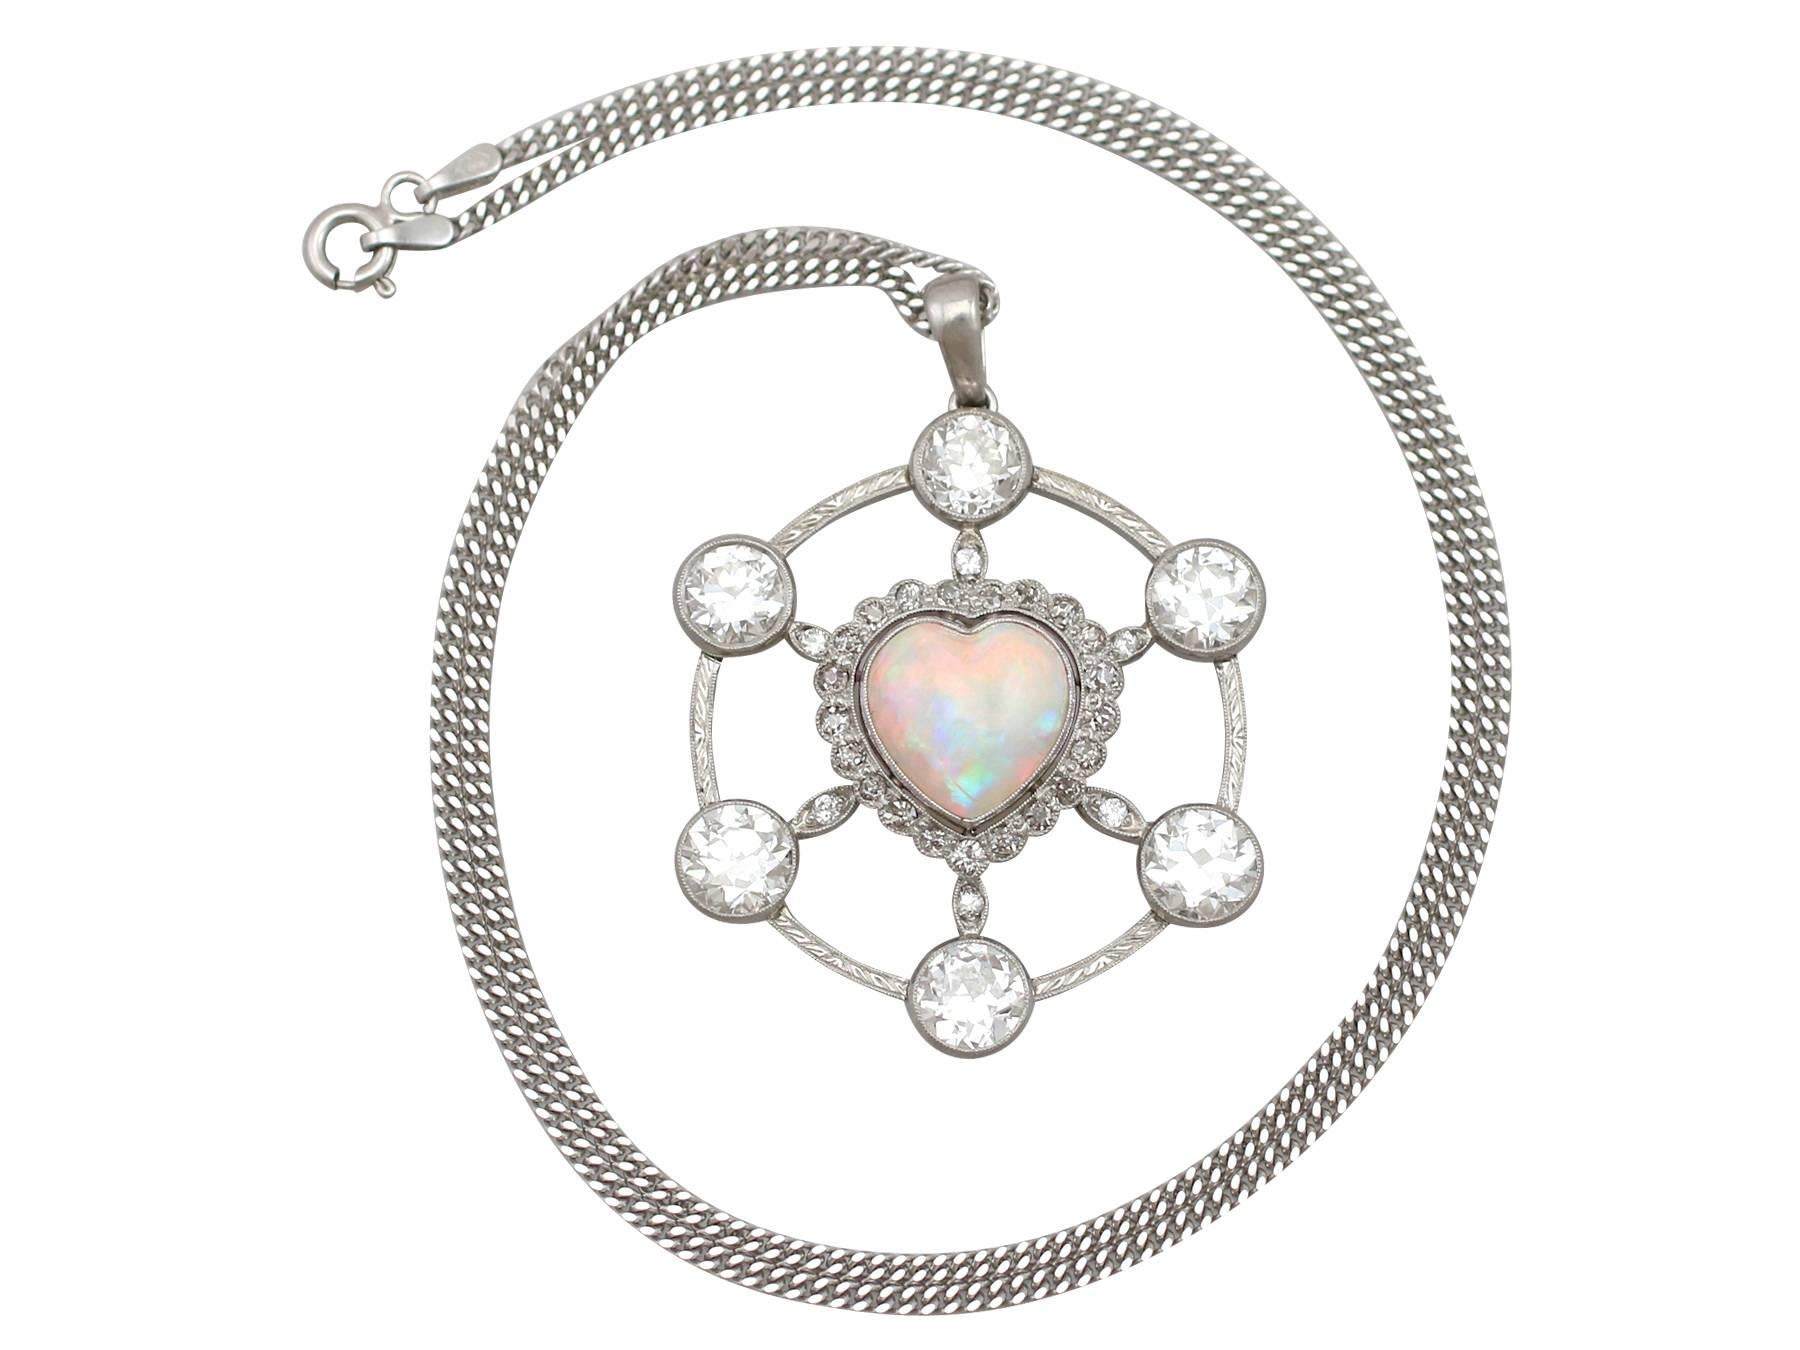 A stunning vintage 2.47 carat opal, 5.34 carat diamond and platinum pendant with 18 karat white gold chain; part of our diverse gemstone jewelry collections.

This stunning, fine and impressive heart opal pendant has been crafted in platinum.

The